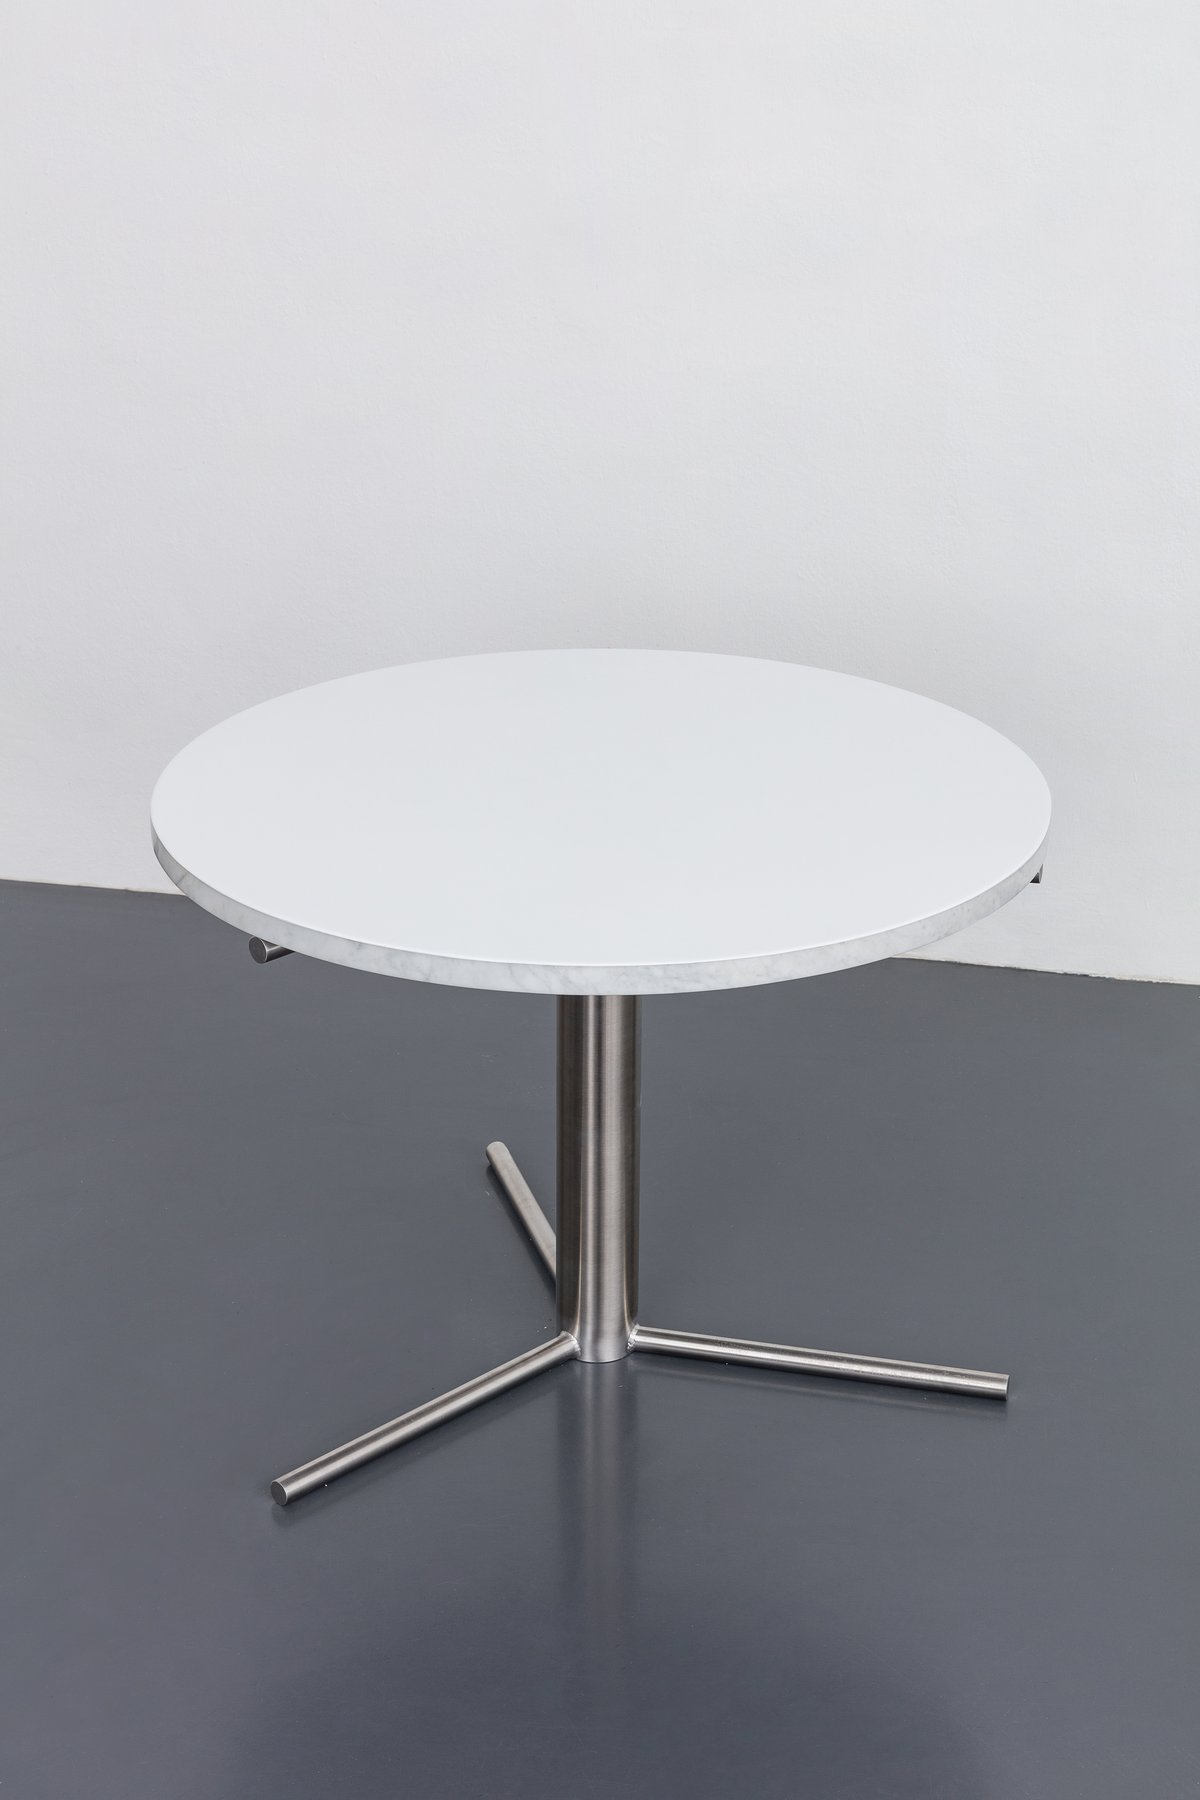 Benjamin HirteUntitled, 2022Stainless steel, Marble, lacquer60 x ø 90 cm